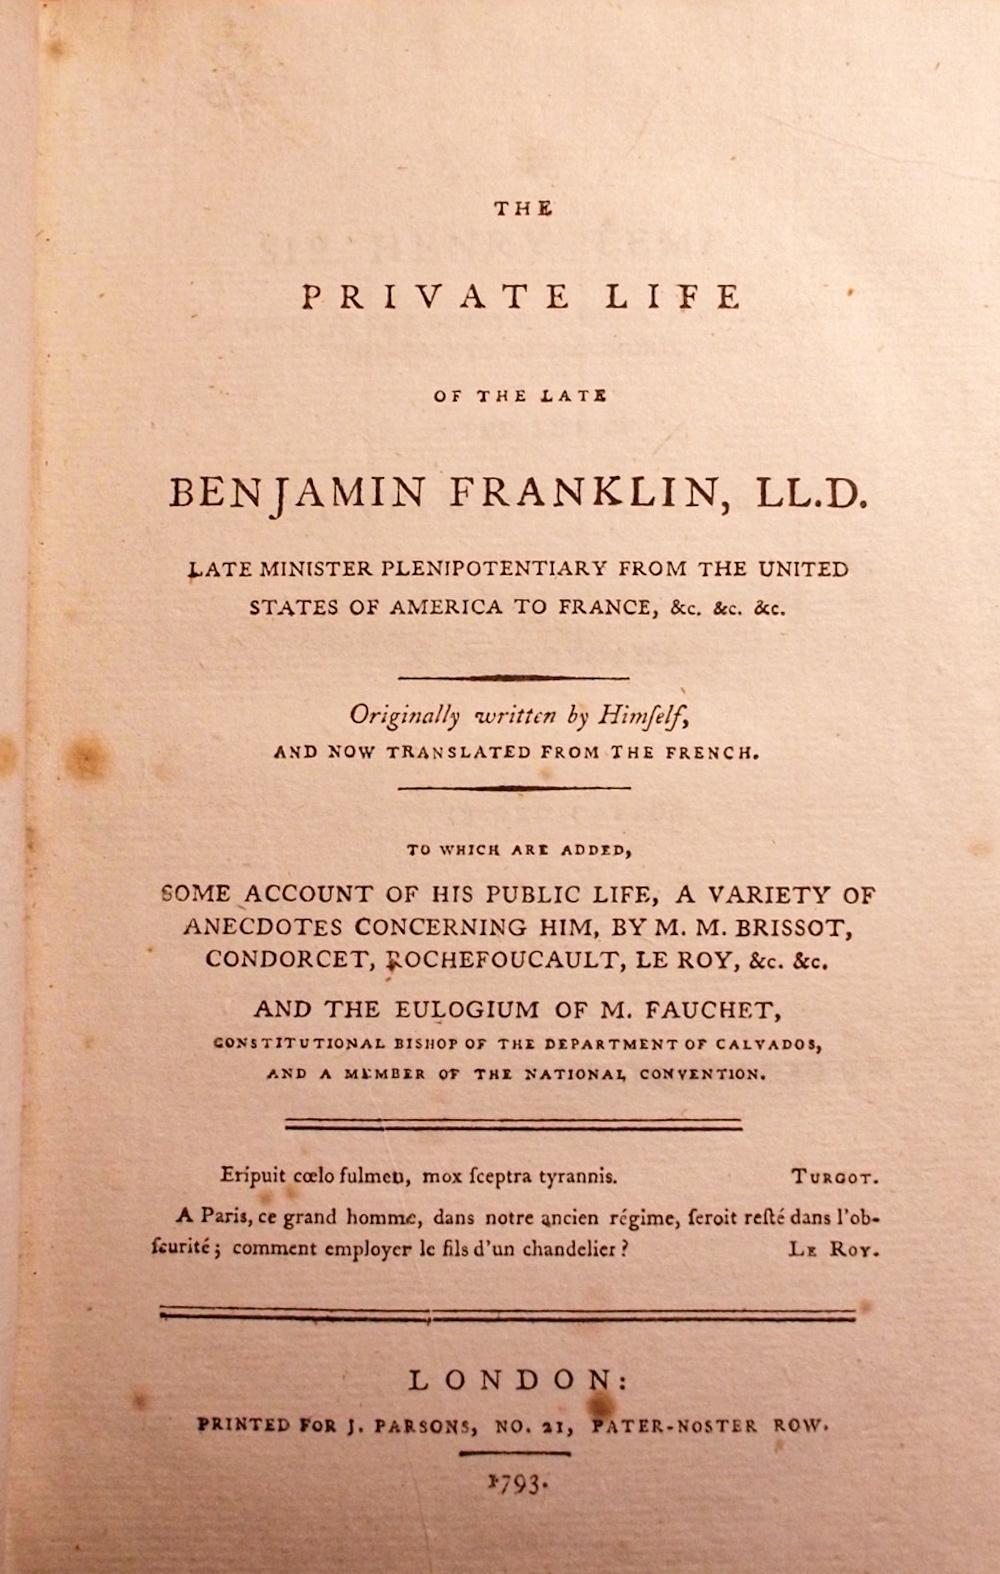 The private life of the late Benjamin Franklin